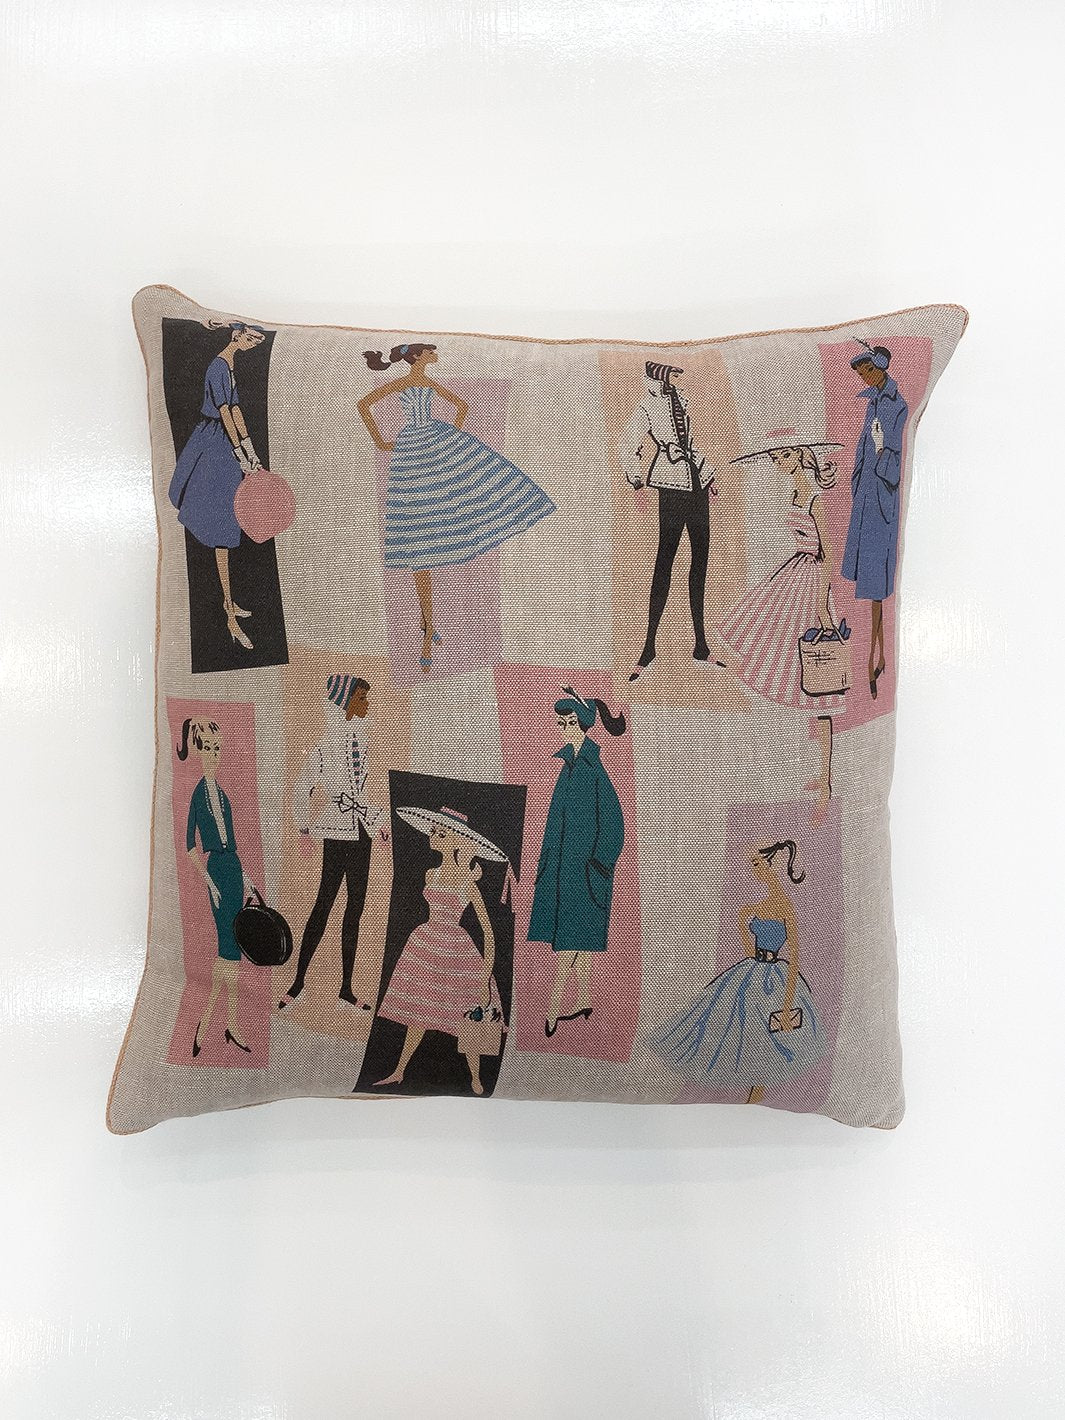 'Mod Shapes' Throw Pillow by Barbie™ - Lavender Peach on Flax Linen